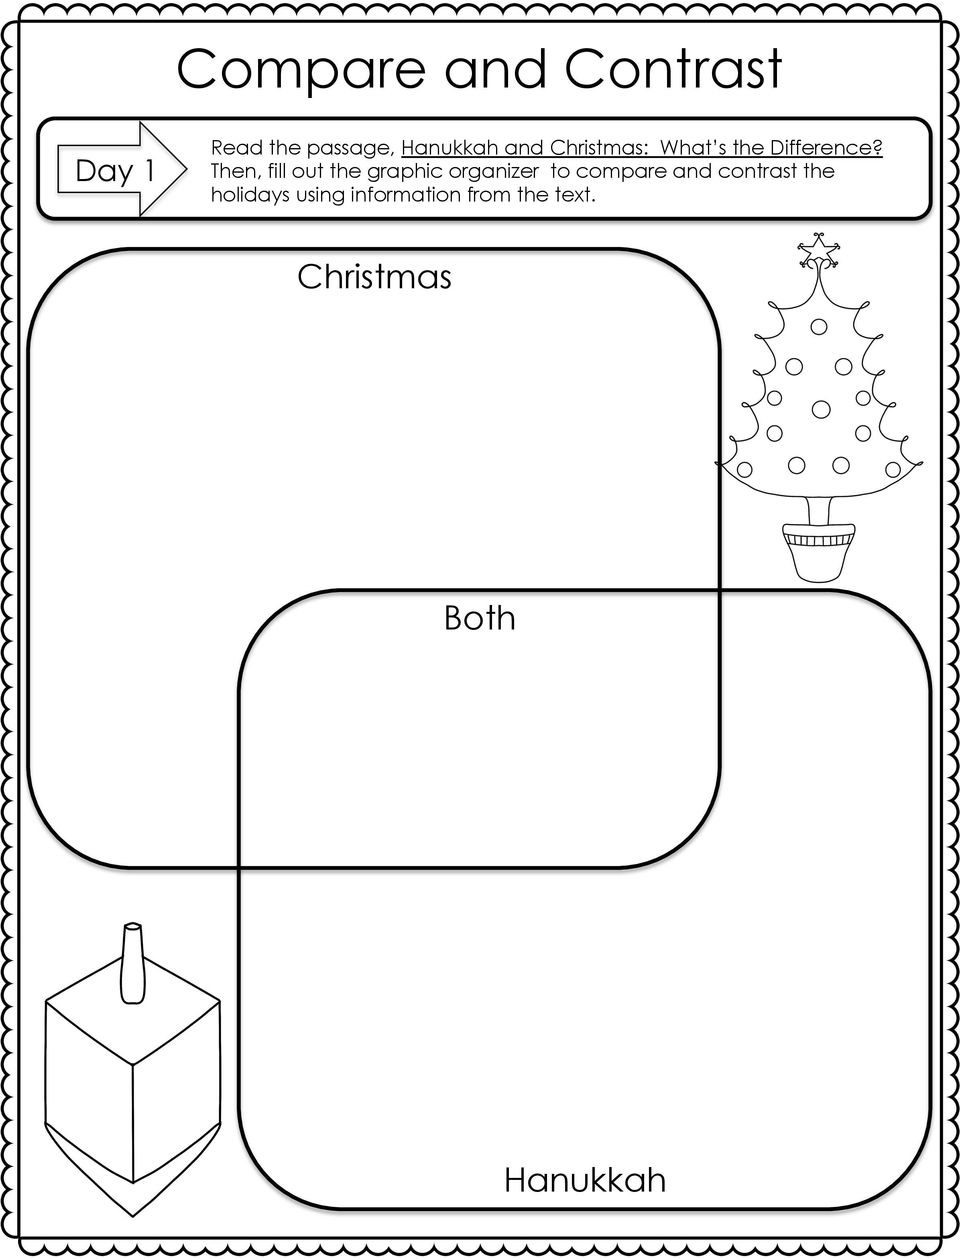 Then, fill out the graphic organizer to compare and